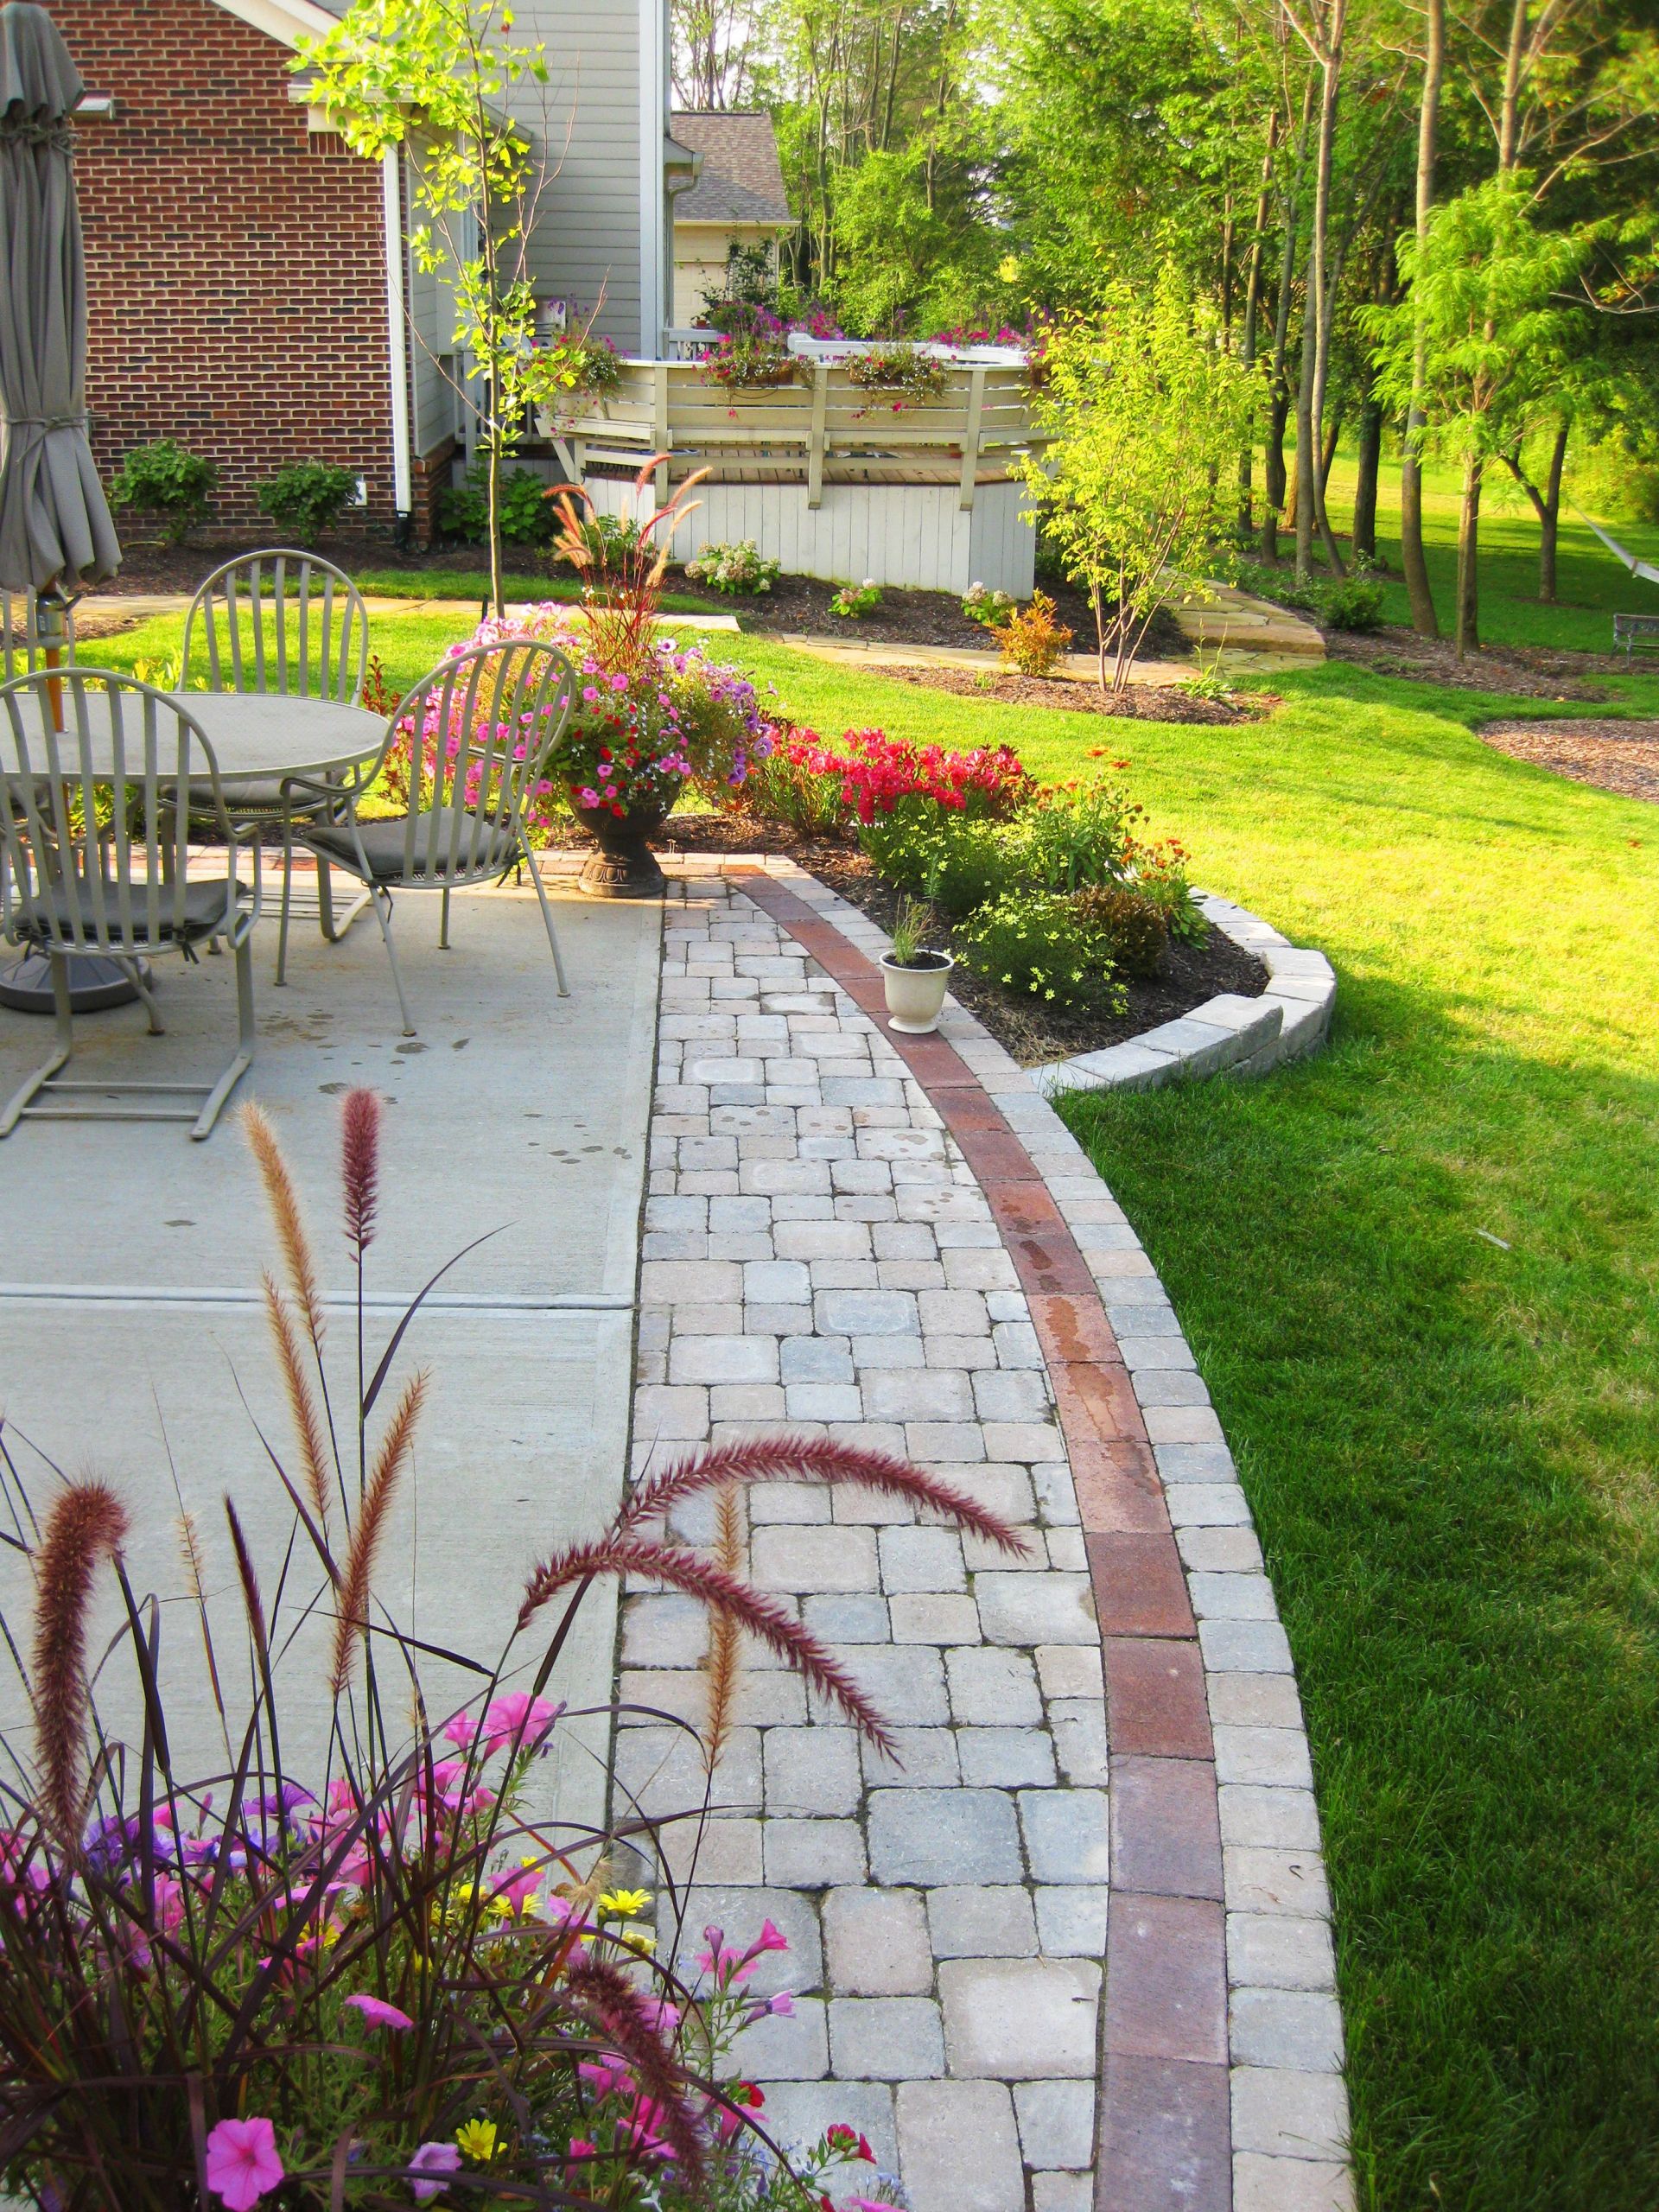 Landscaping Around Concrete Patio
 Stones and pavers to extend the patio Landscape